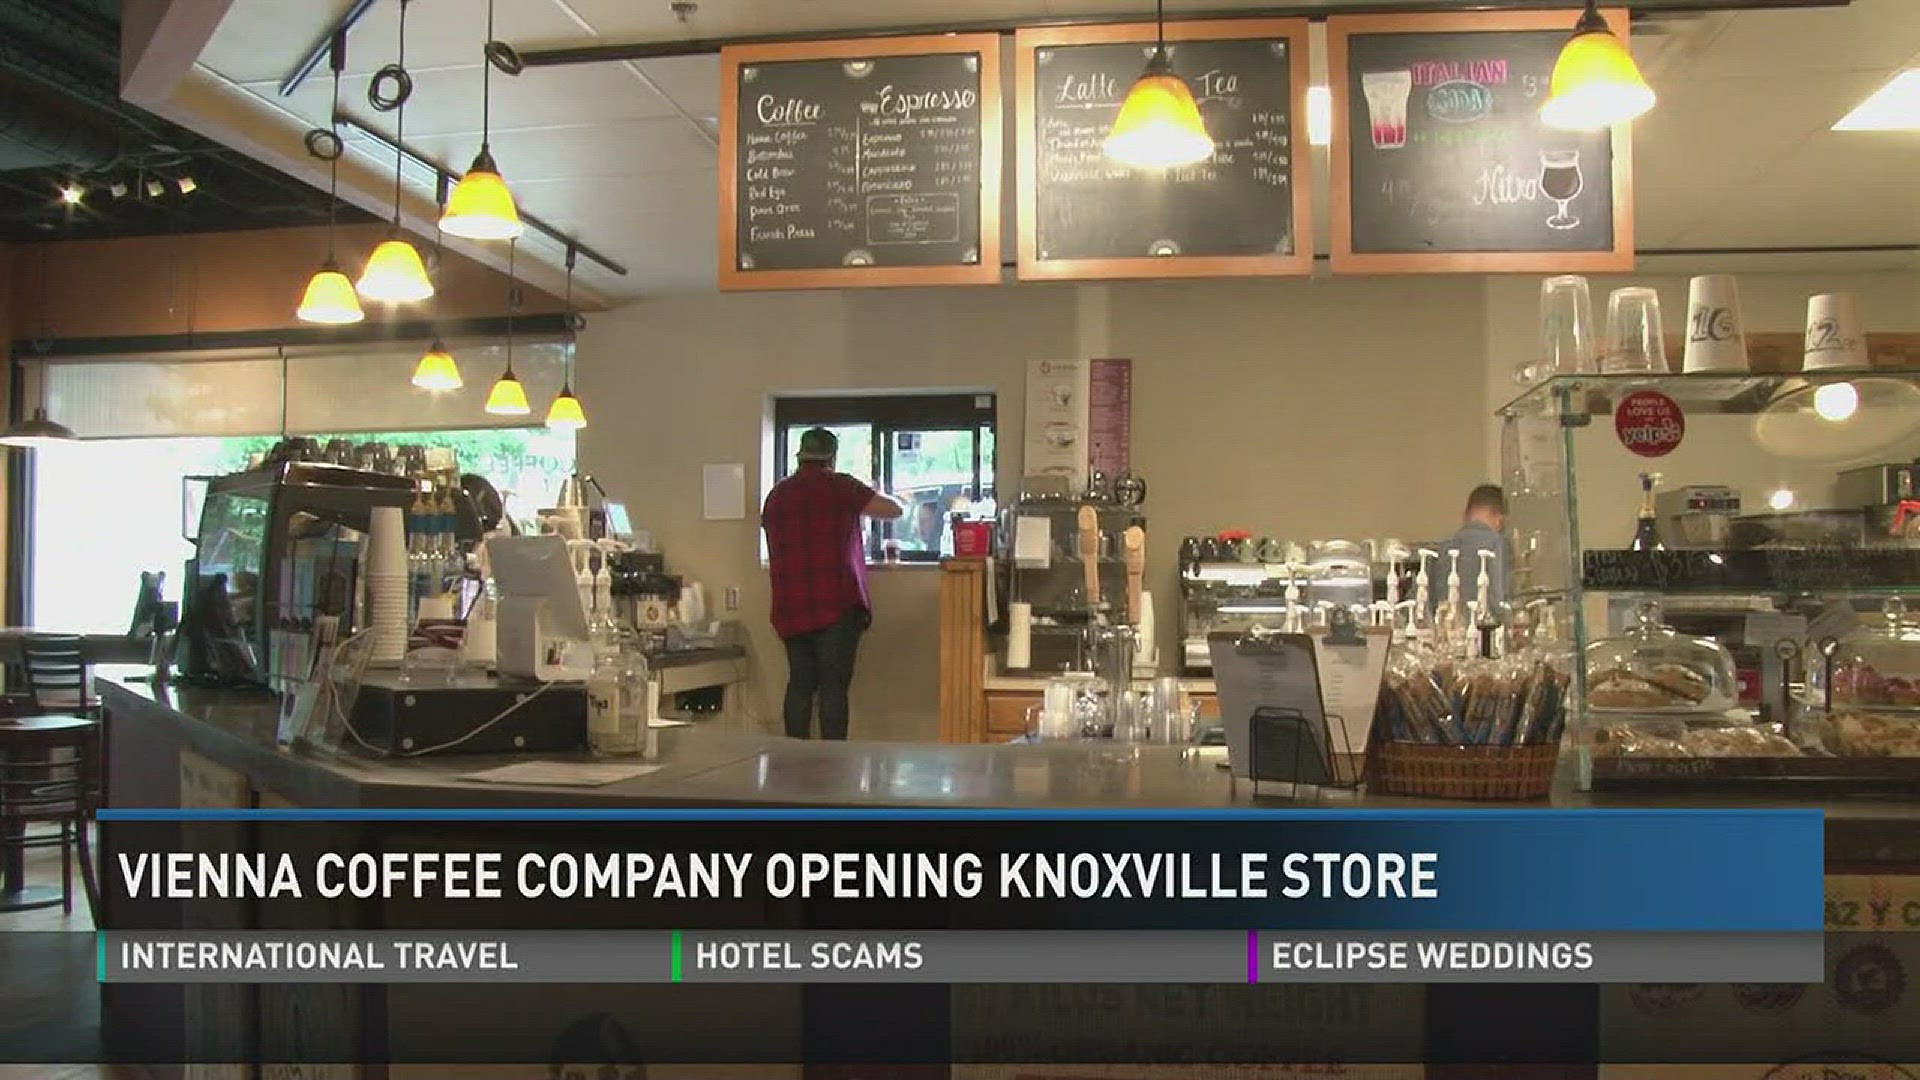 June 29, 2017: Maryville-based Vienna Coffee Company is expanding to open a Knoxville location.